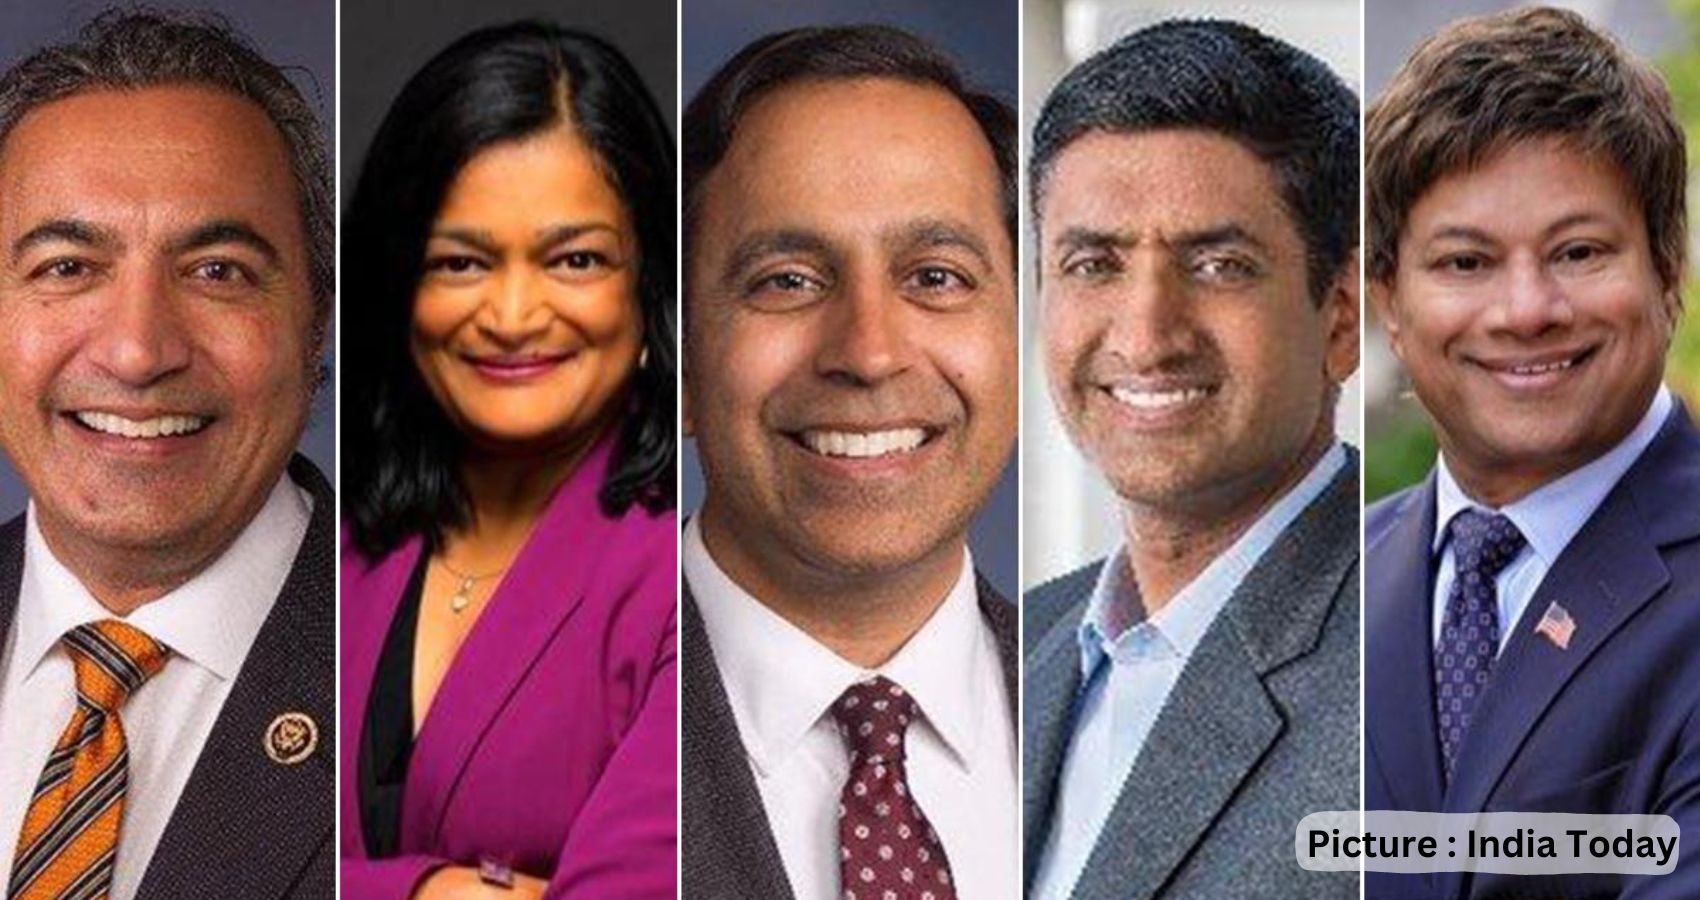 Indian American Lawmakers Assigned to Lead Critical Committees On Capitol Hill